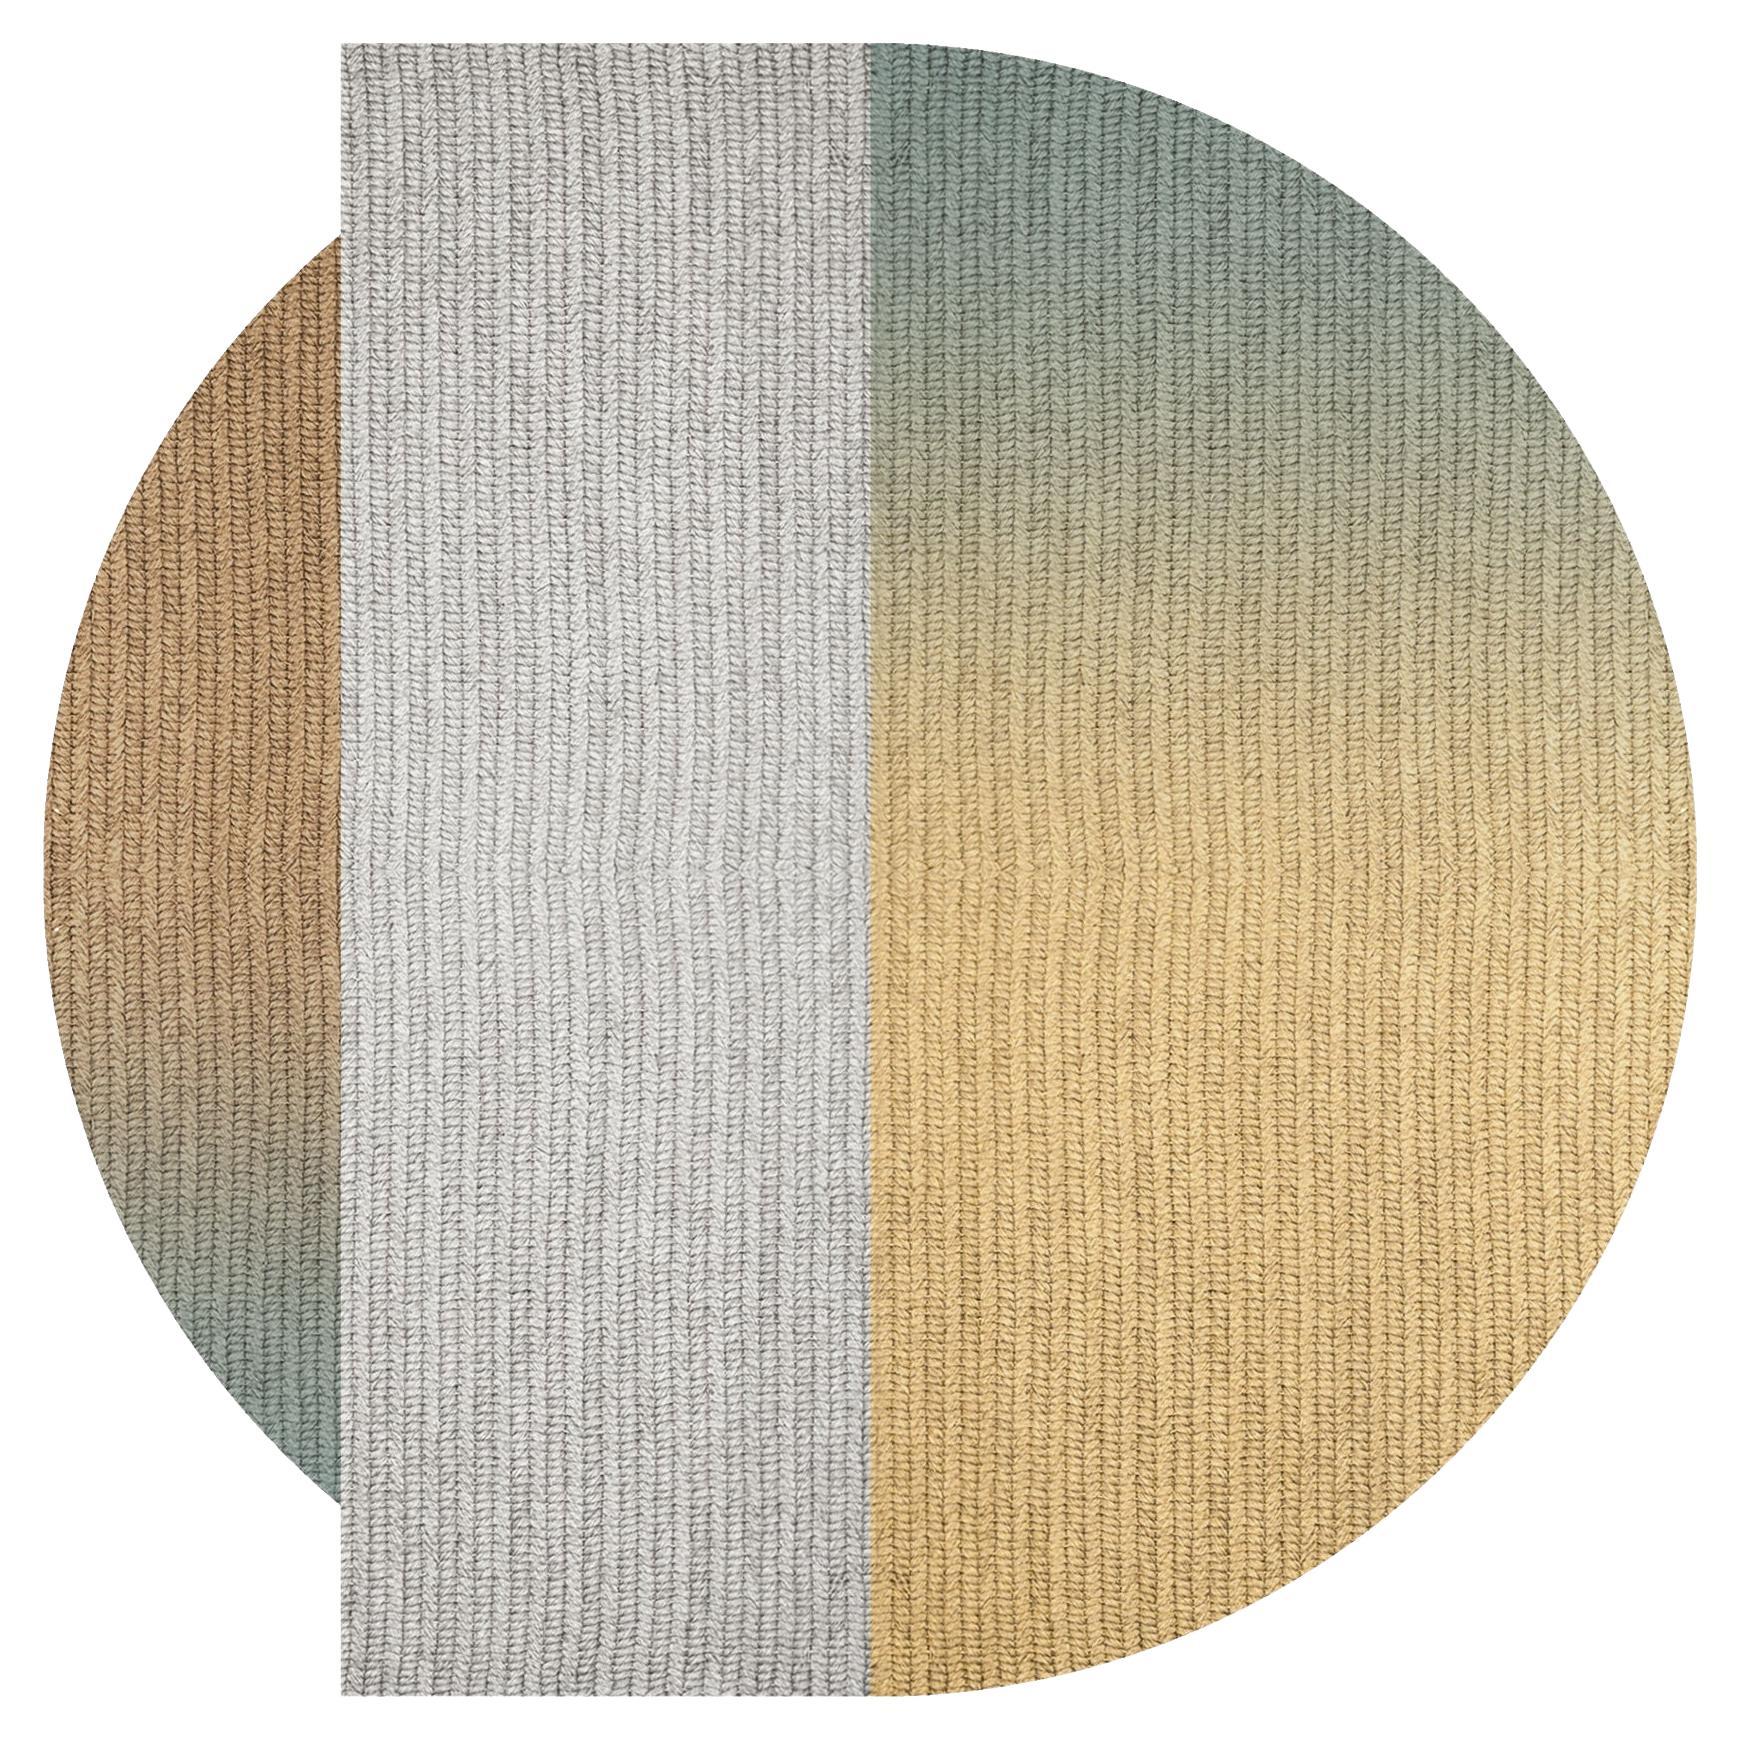 'Flux' Rug in Abaca, Colour 'Sterling', Ø 200cm by Claire Vos for Musett Design